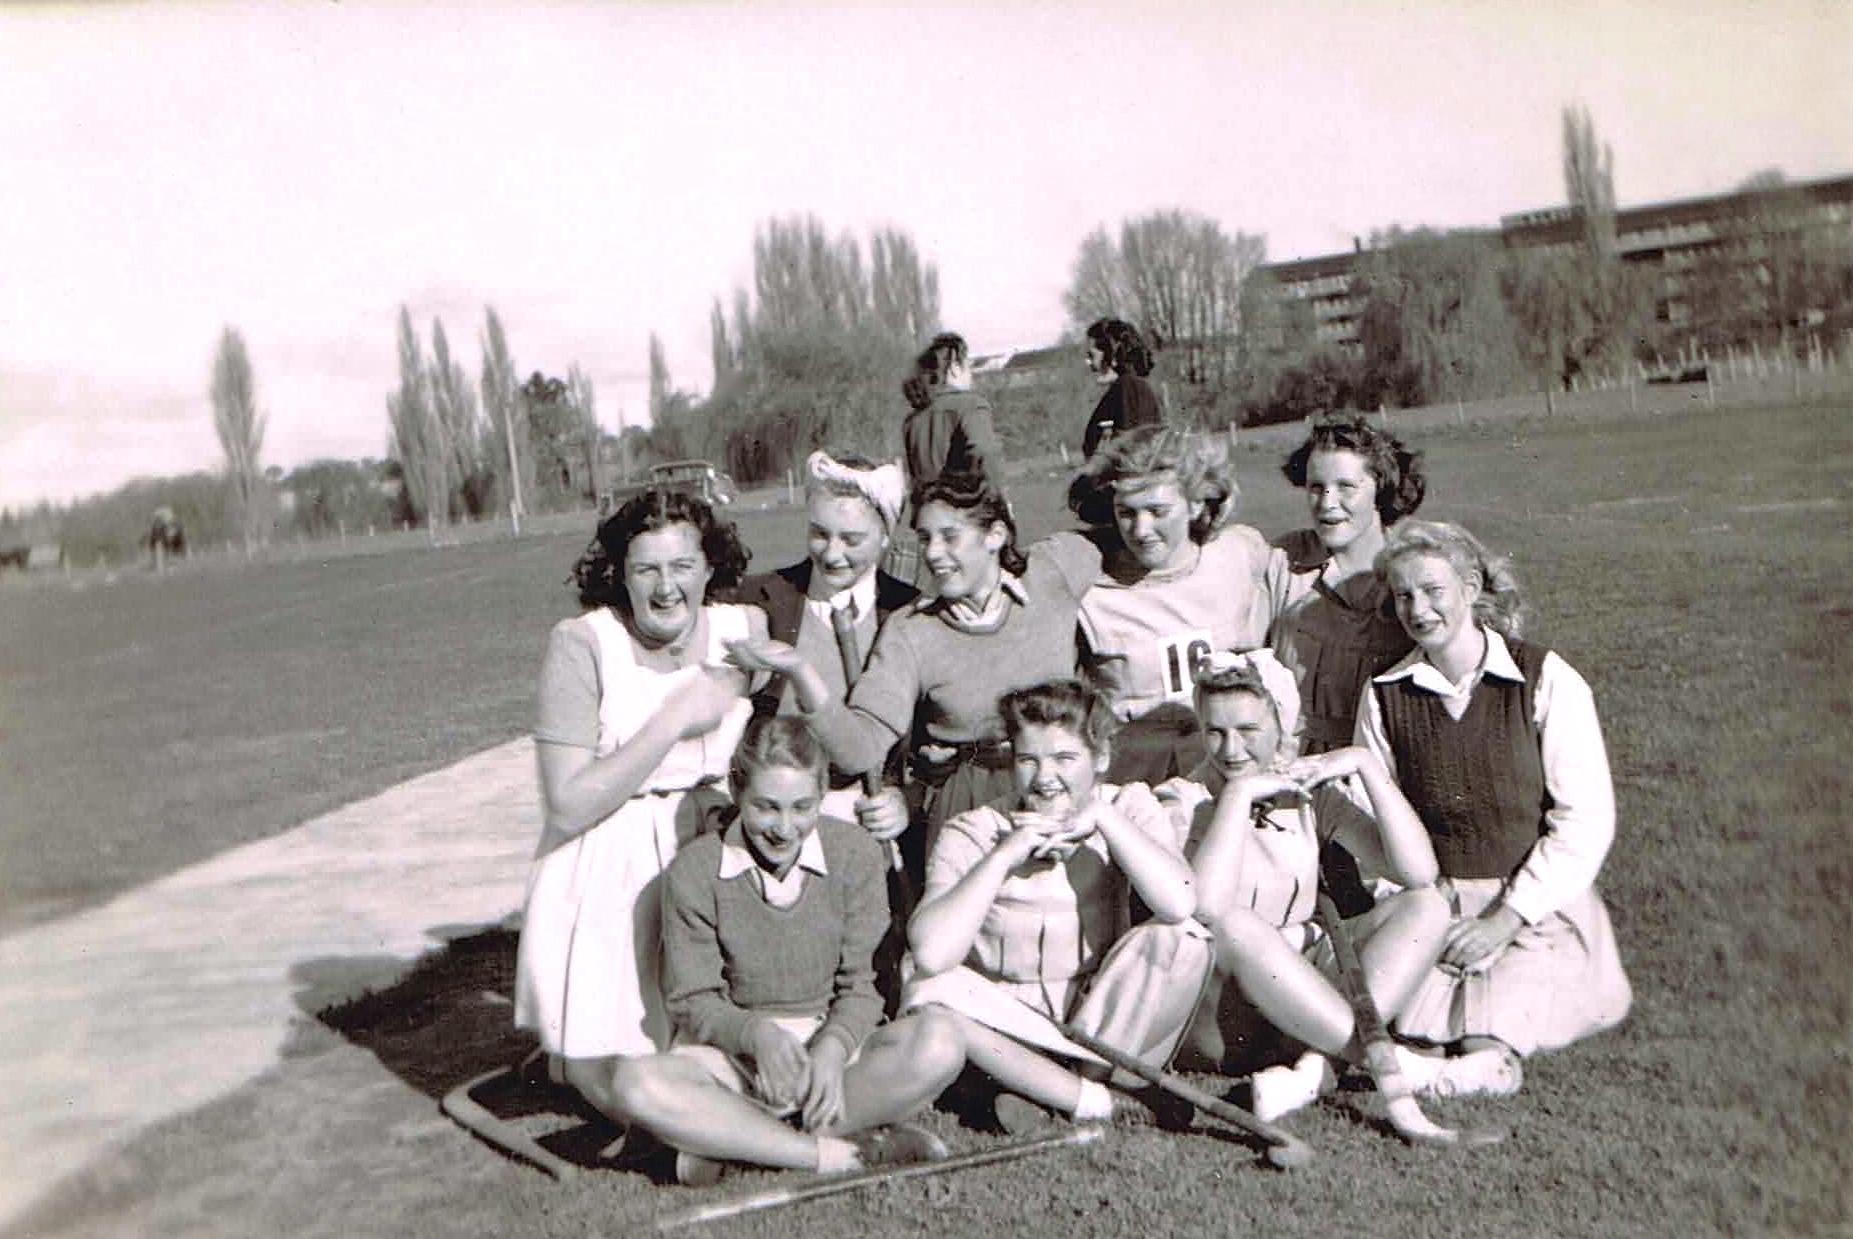 Canberra High School Hockey team at Acton flats